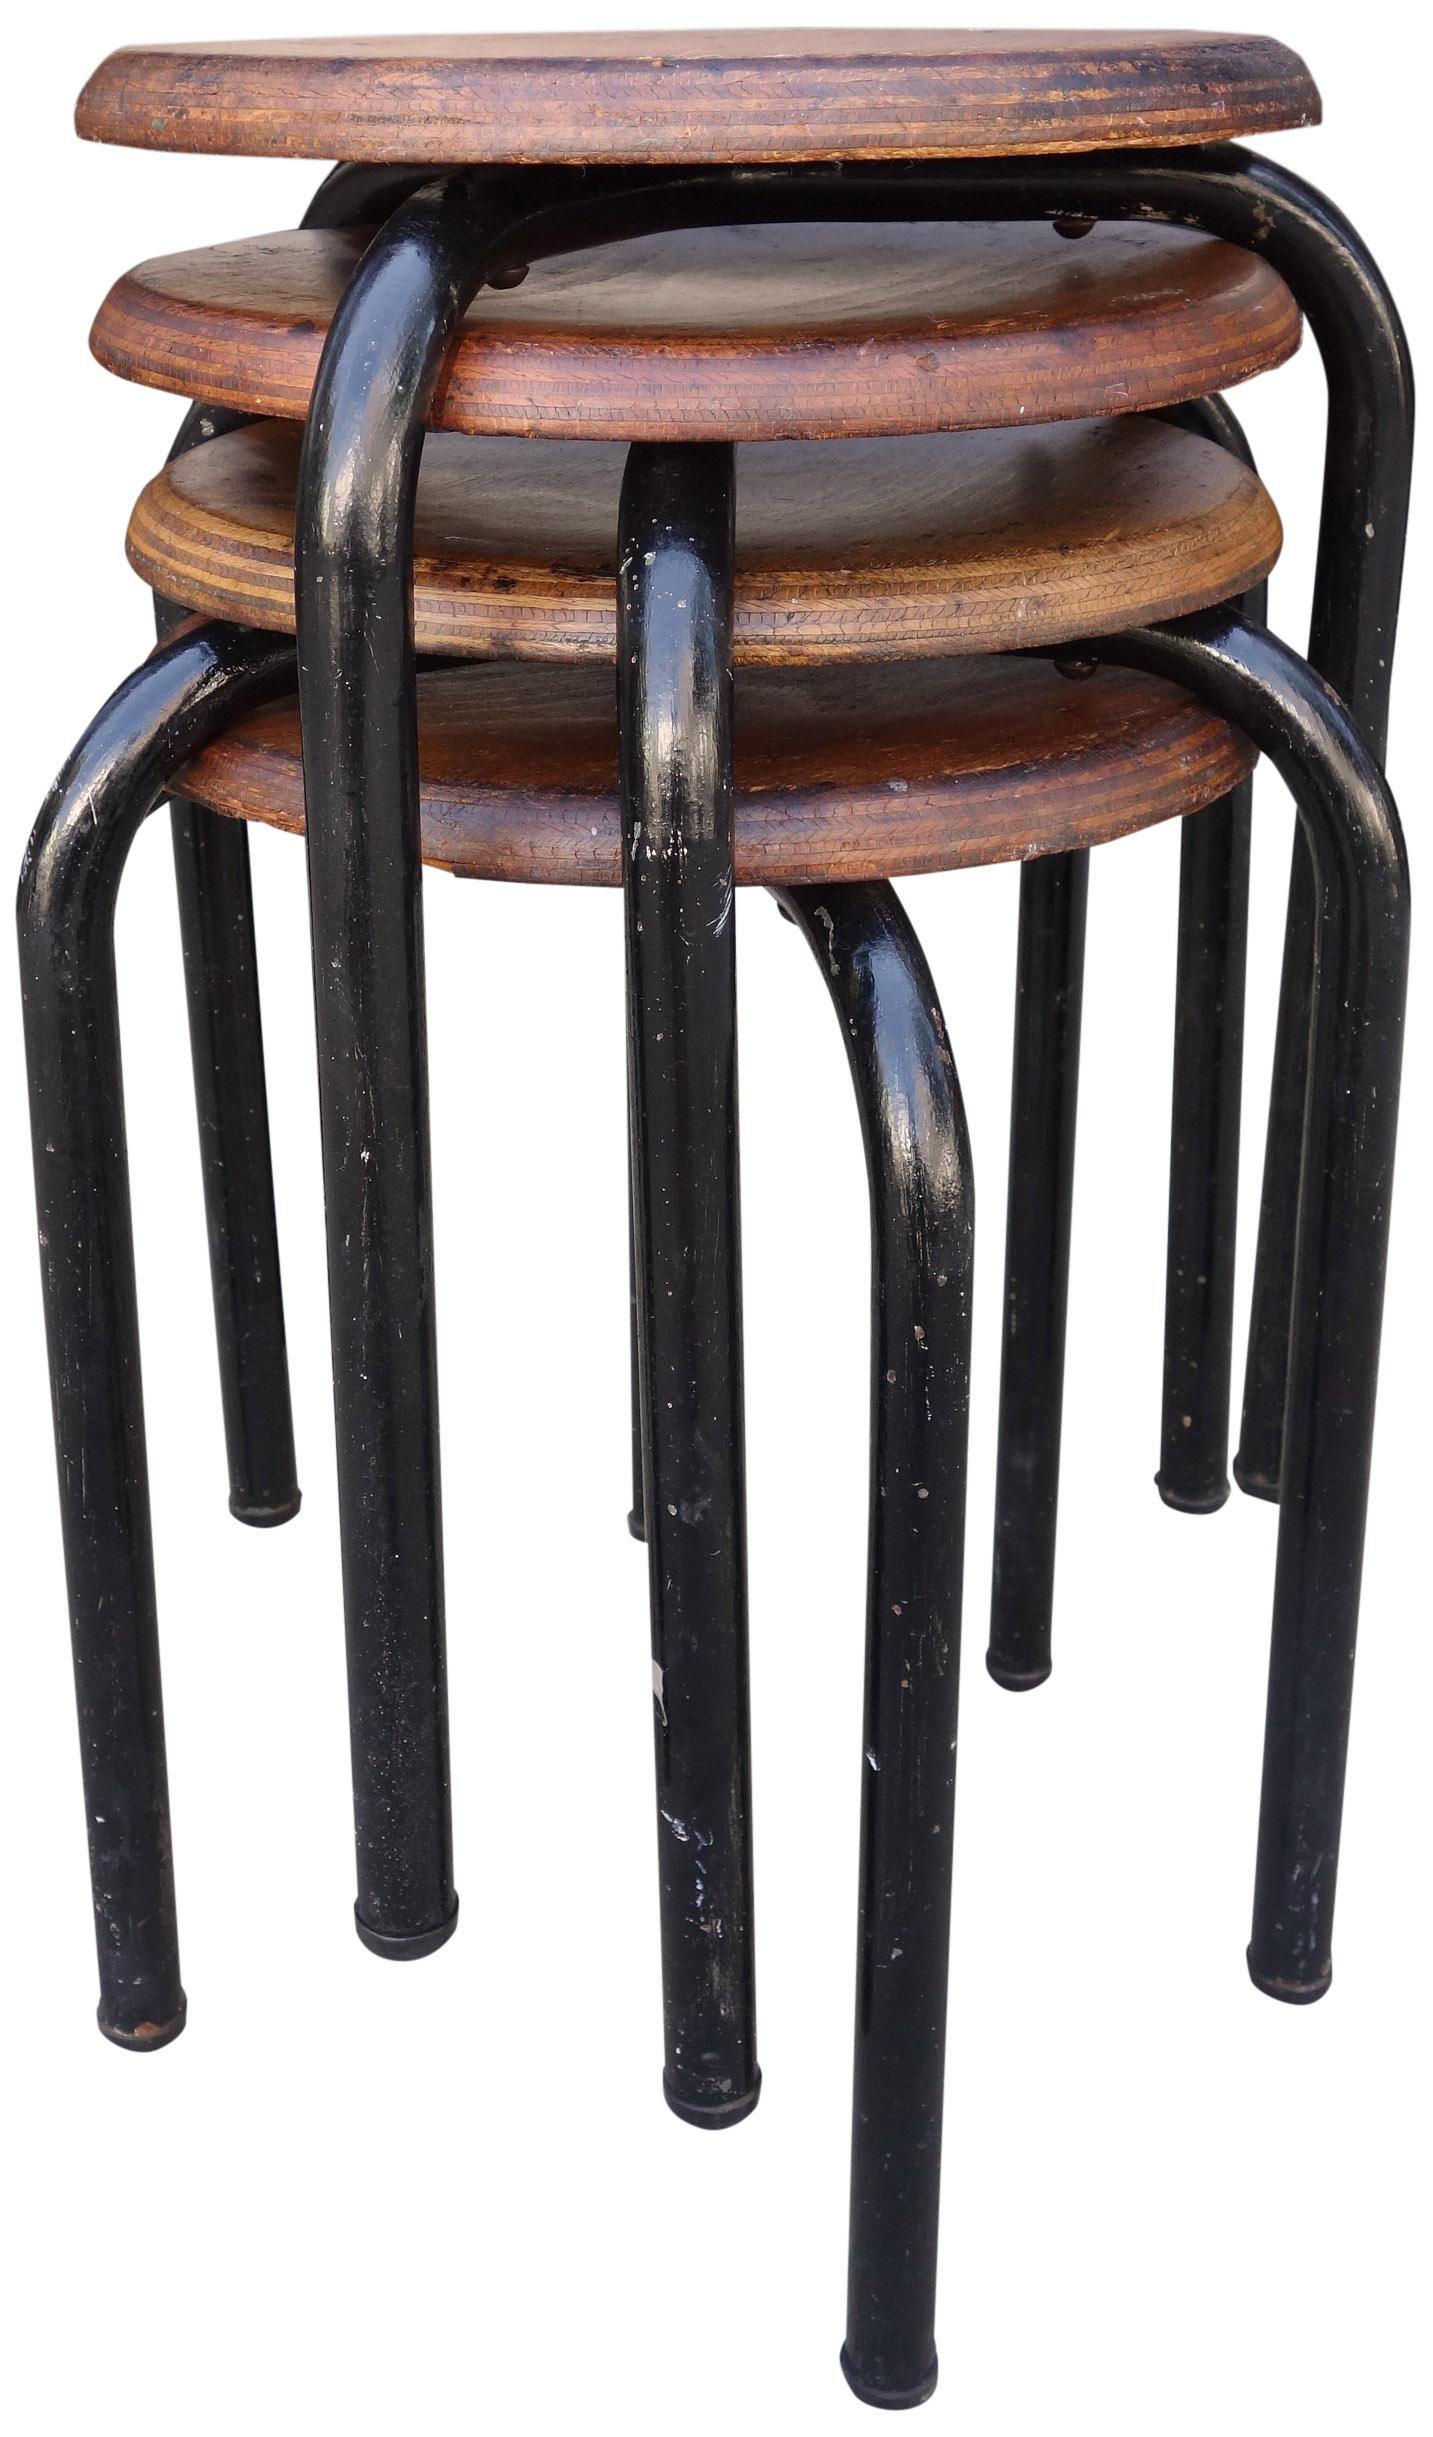 Atelier Jean Prouvé designed for the Lycée Fabert, Metz. France, 1930s. Lacquered metal base and turned plywood seat. All have markings on the underside. These wonderful stools also make great side tables or end tables. 

Measures: Seat is 13''